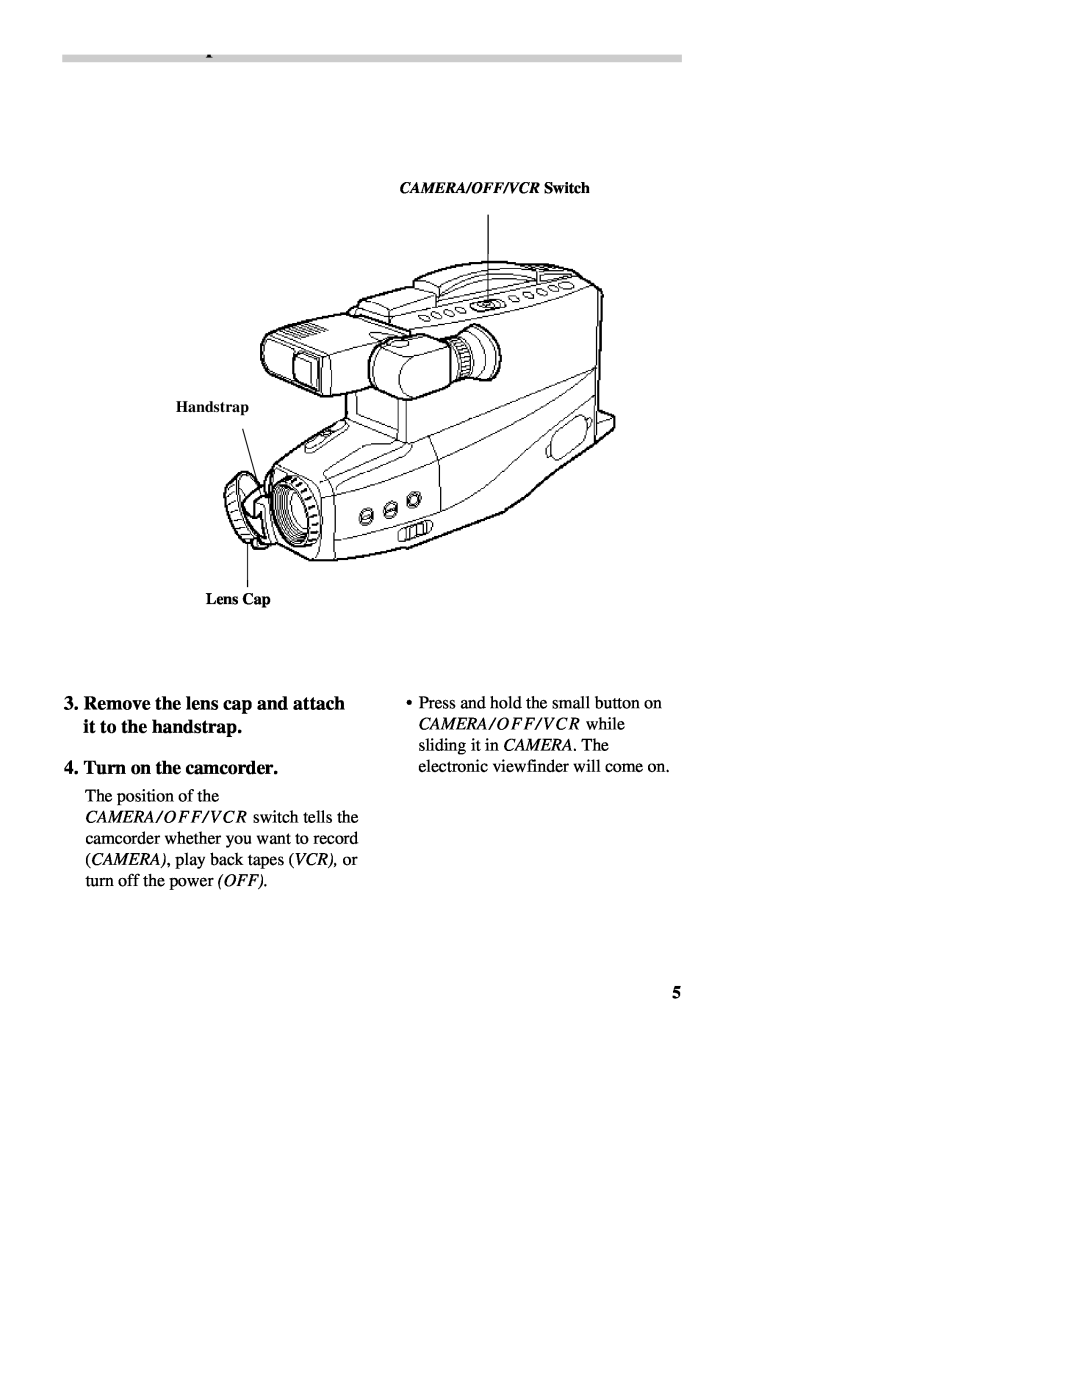 RCA CC437 manual Remove the lens cap and attach it to the handstrap, Turn on the camcorder, The position of the 